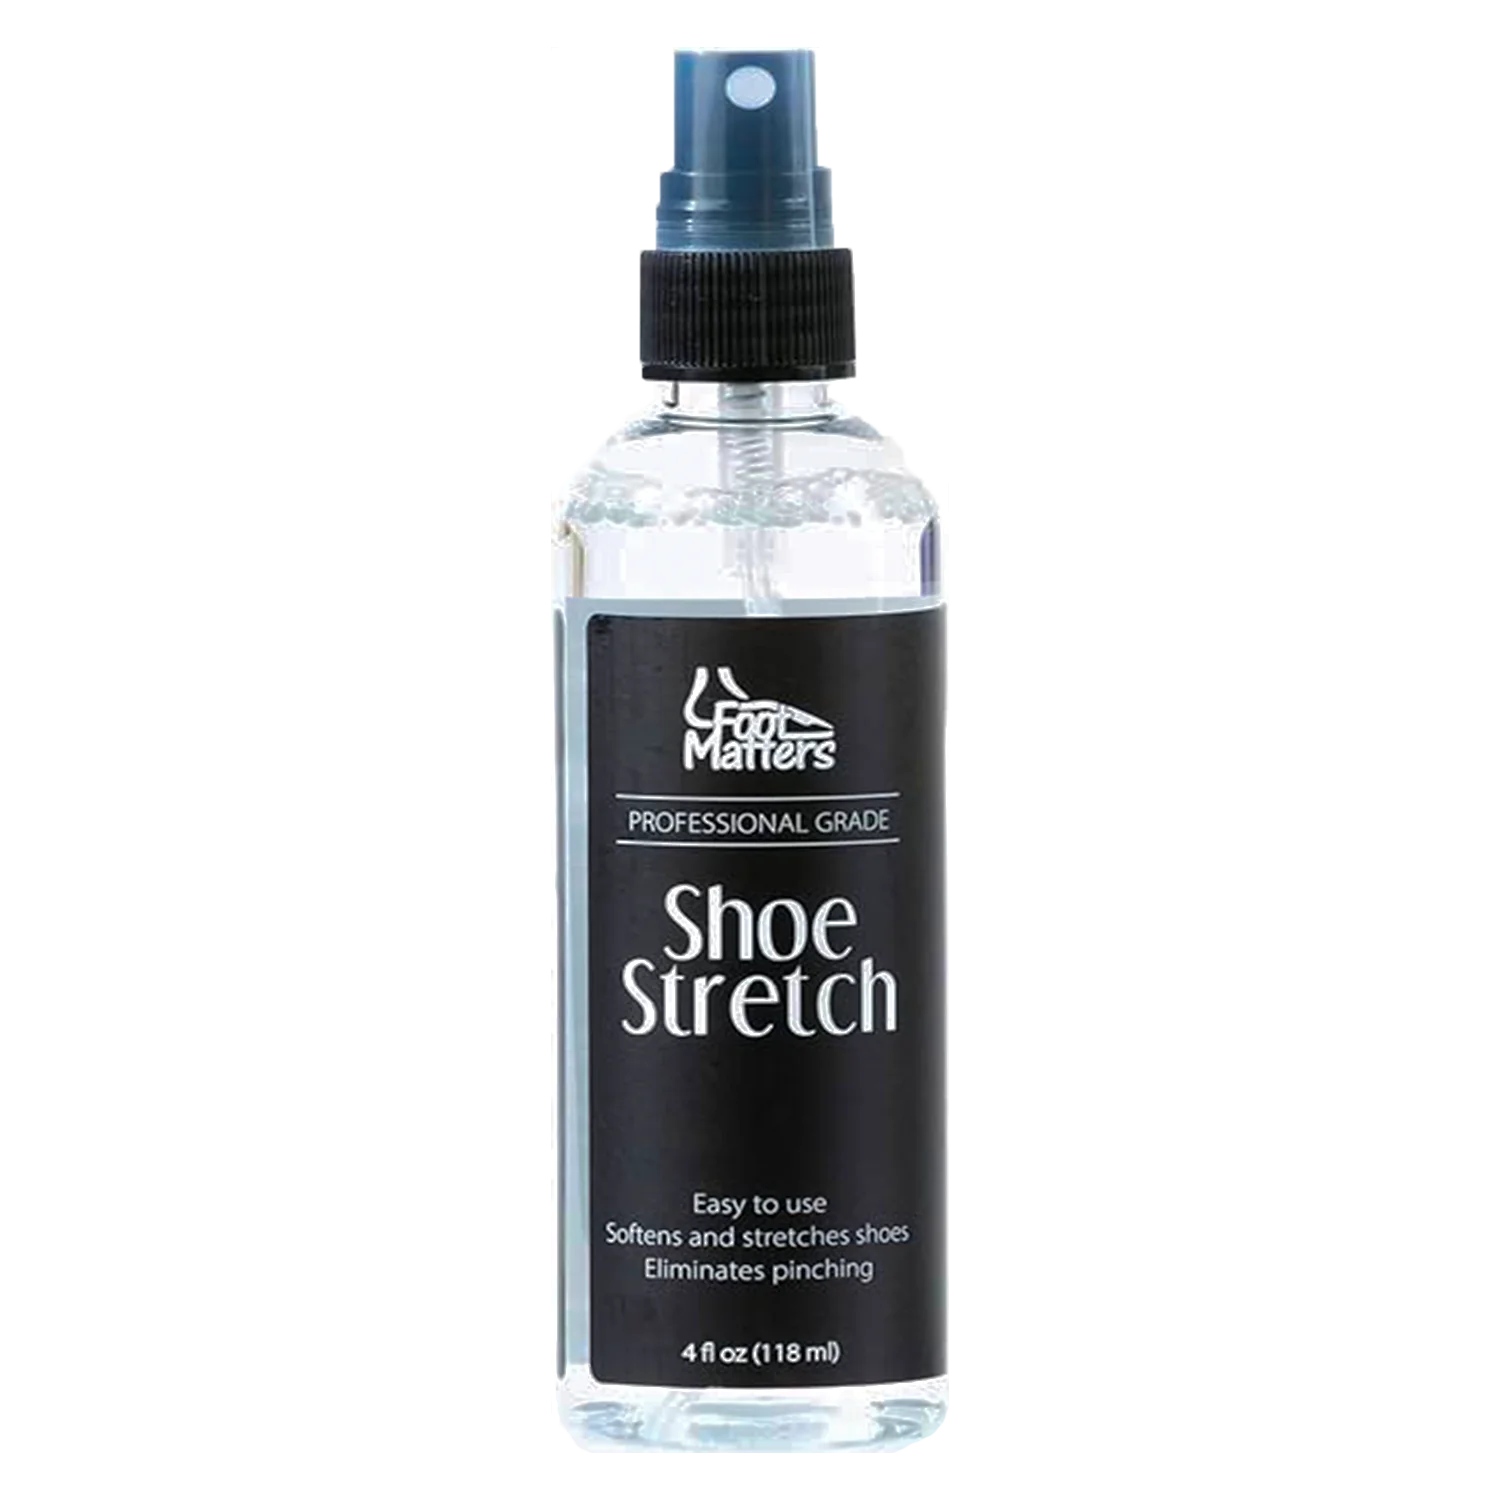 Canvas Shoe Stretching Spray

how to stretch cloth shoes
shoe stretch
stretching shoes
how to stretch shoes
how stretch out shoes
expanding shoes
how to make shoes bigger
how to stretch shoes immediately
how to widen a shoe
how to stretch shoes for wide feet
stretch out shoes
stretching shoes out